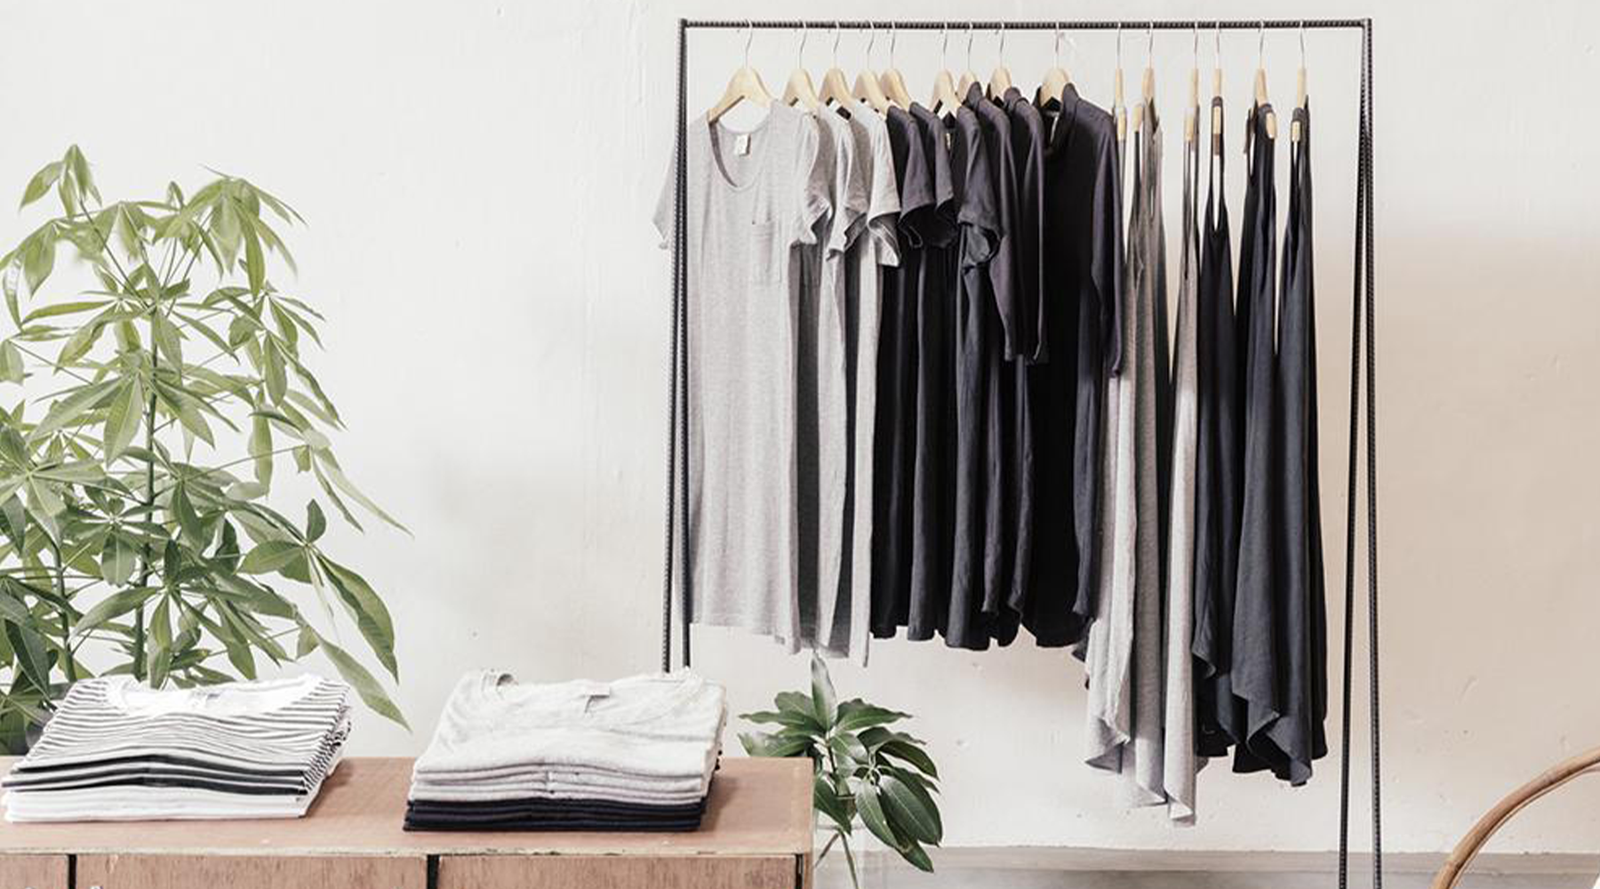 Dorsu | Journal - Buying Better | Ethical Clothing